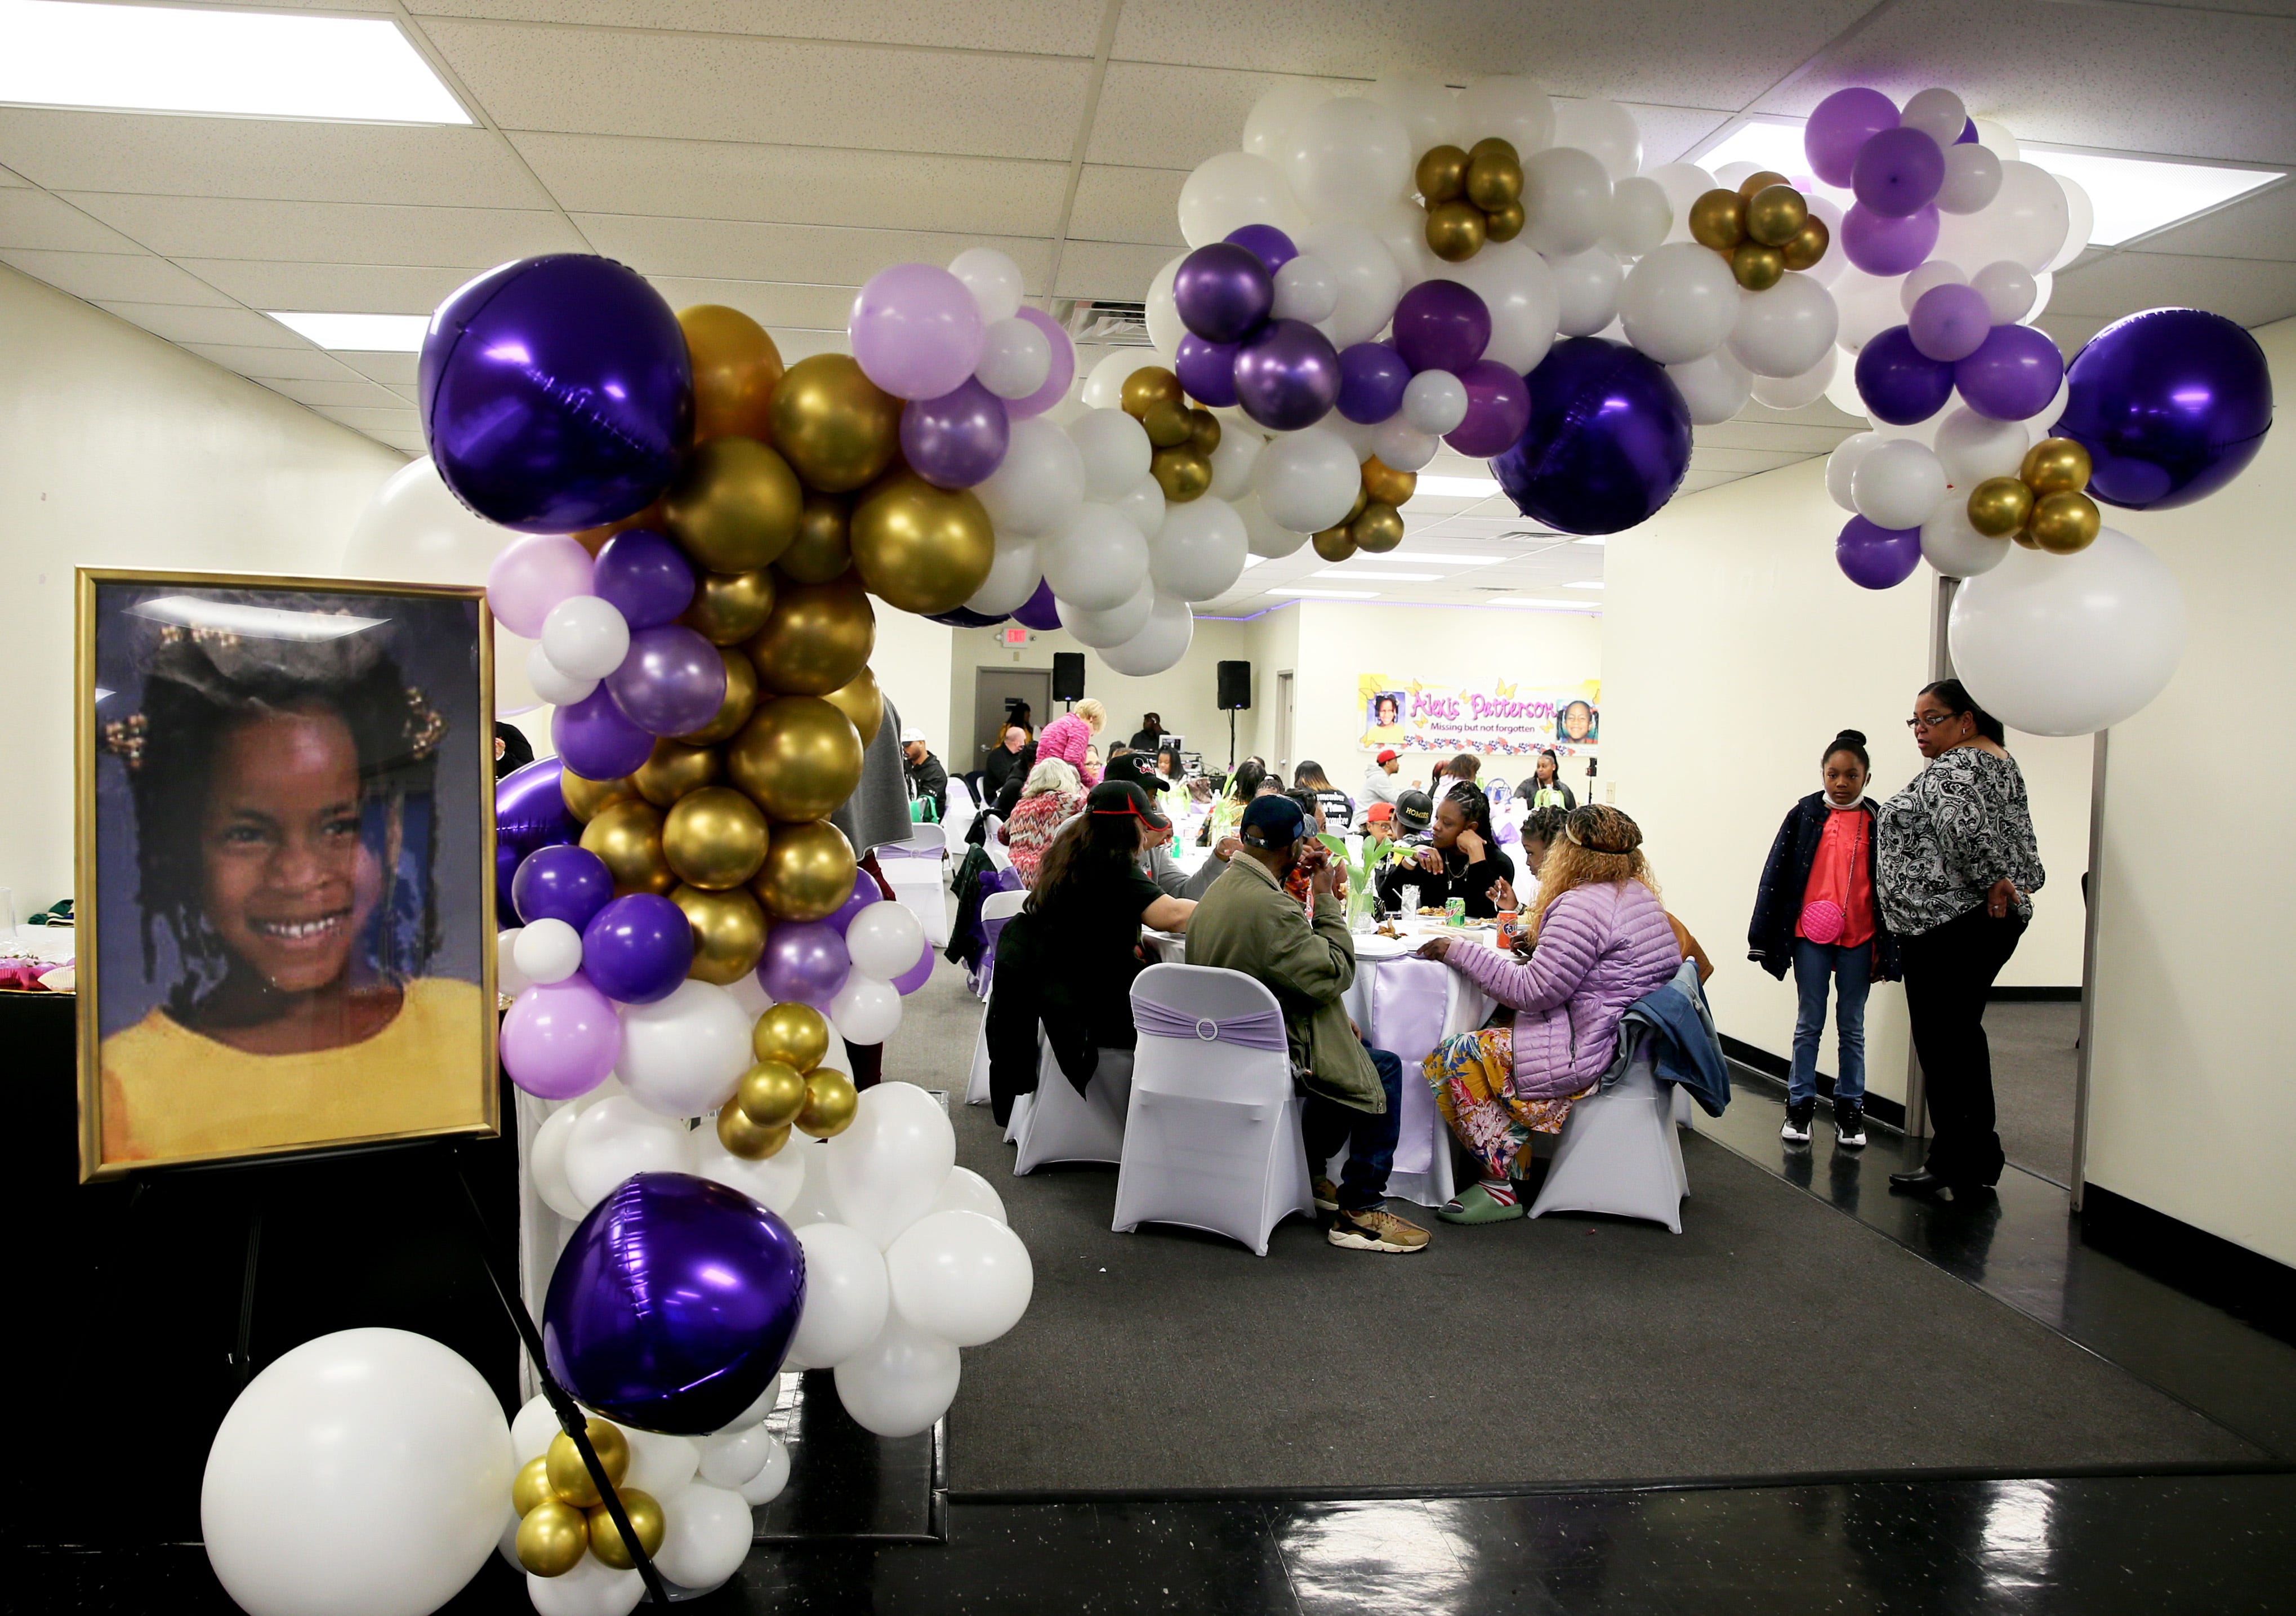 A photo of Alexis Patterson is displayed at a program marking the 20th year of her disappearance. About 100 people attended the event, which Ayanna Patterson, the mother of Alexis, called an “Awakening,” to partake in prayer, poetry, music and a banquet on Sunday, May 1, 2022 in Milwaukee.